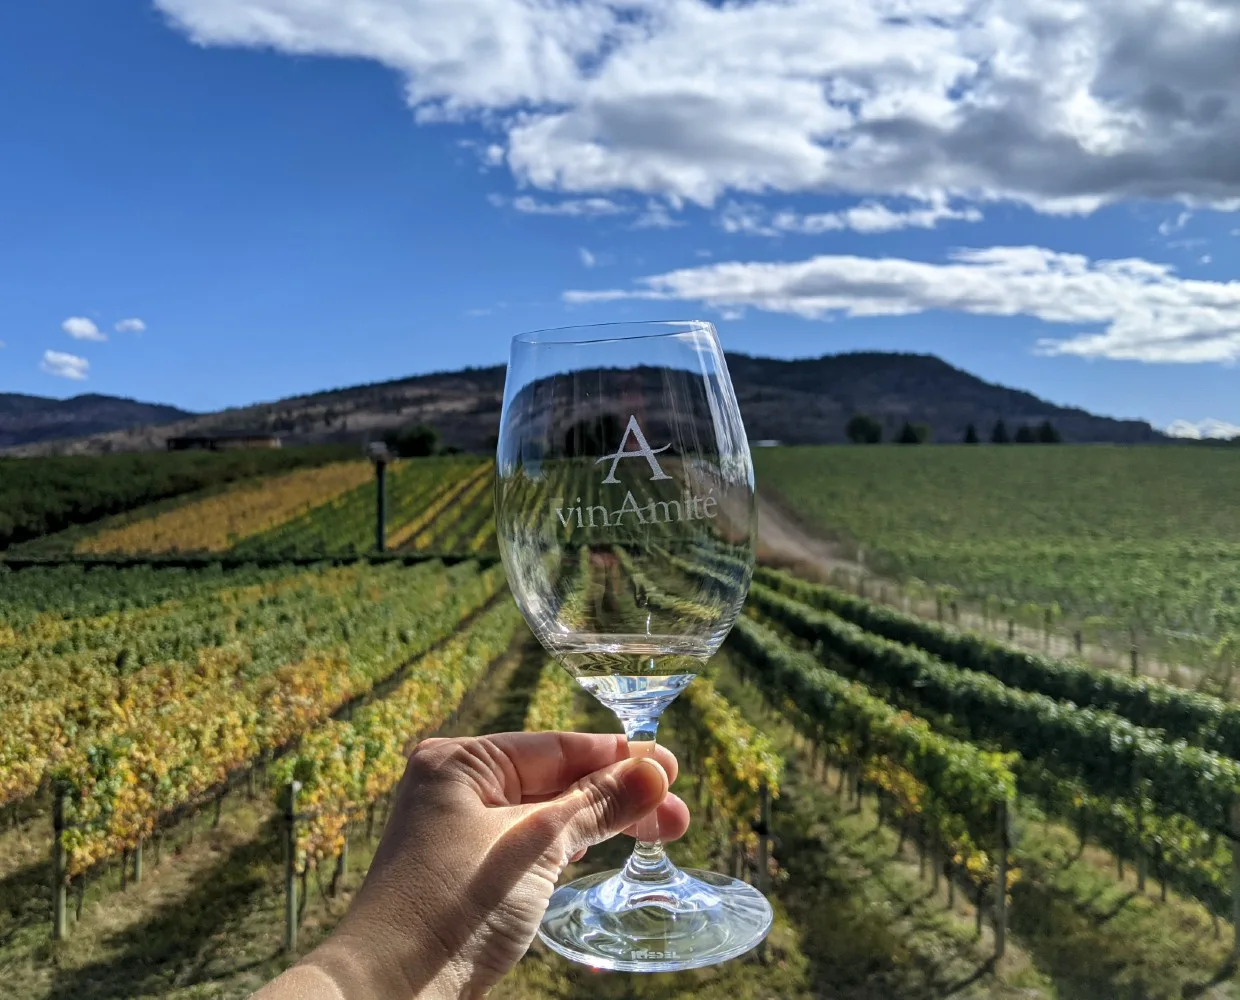 A hand holds up a VinAmité branded wine glass in front of yellowing vineyard